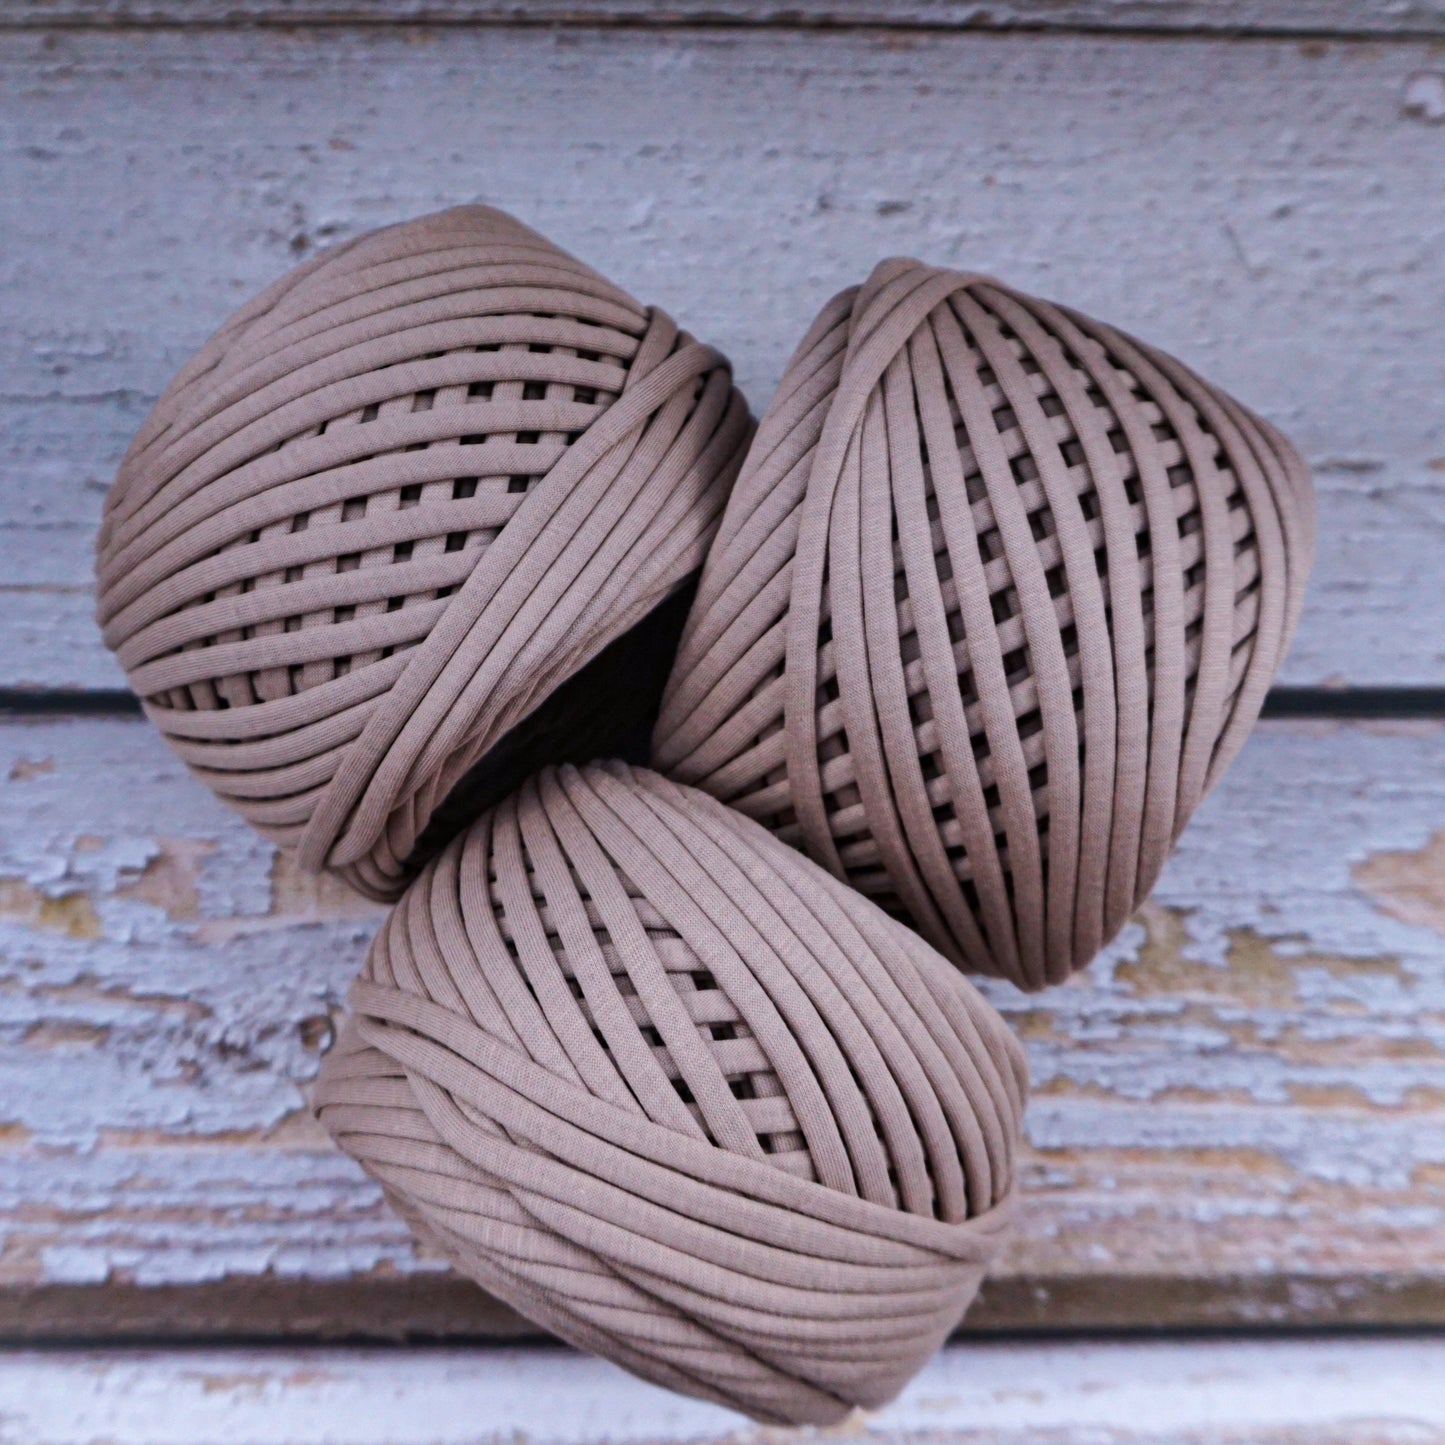 T-shirt yarn for crocheting baskets, bags, rugs and home decor.  Cacao